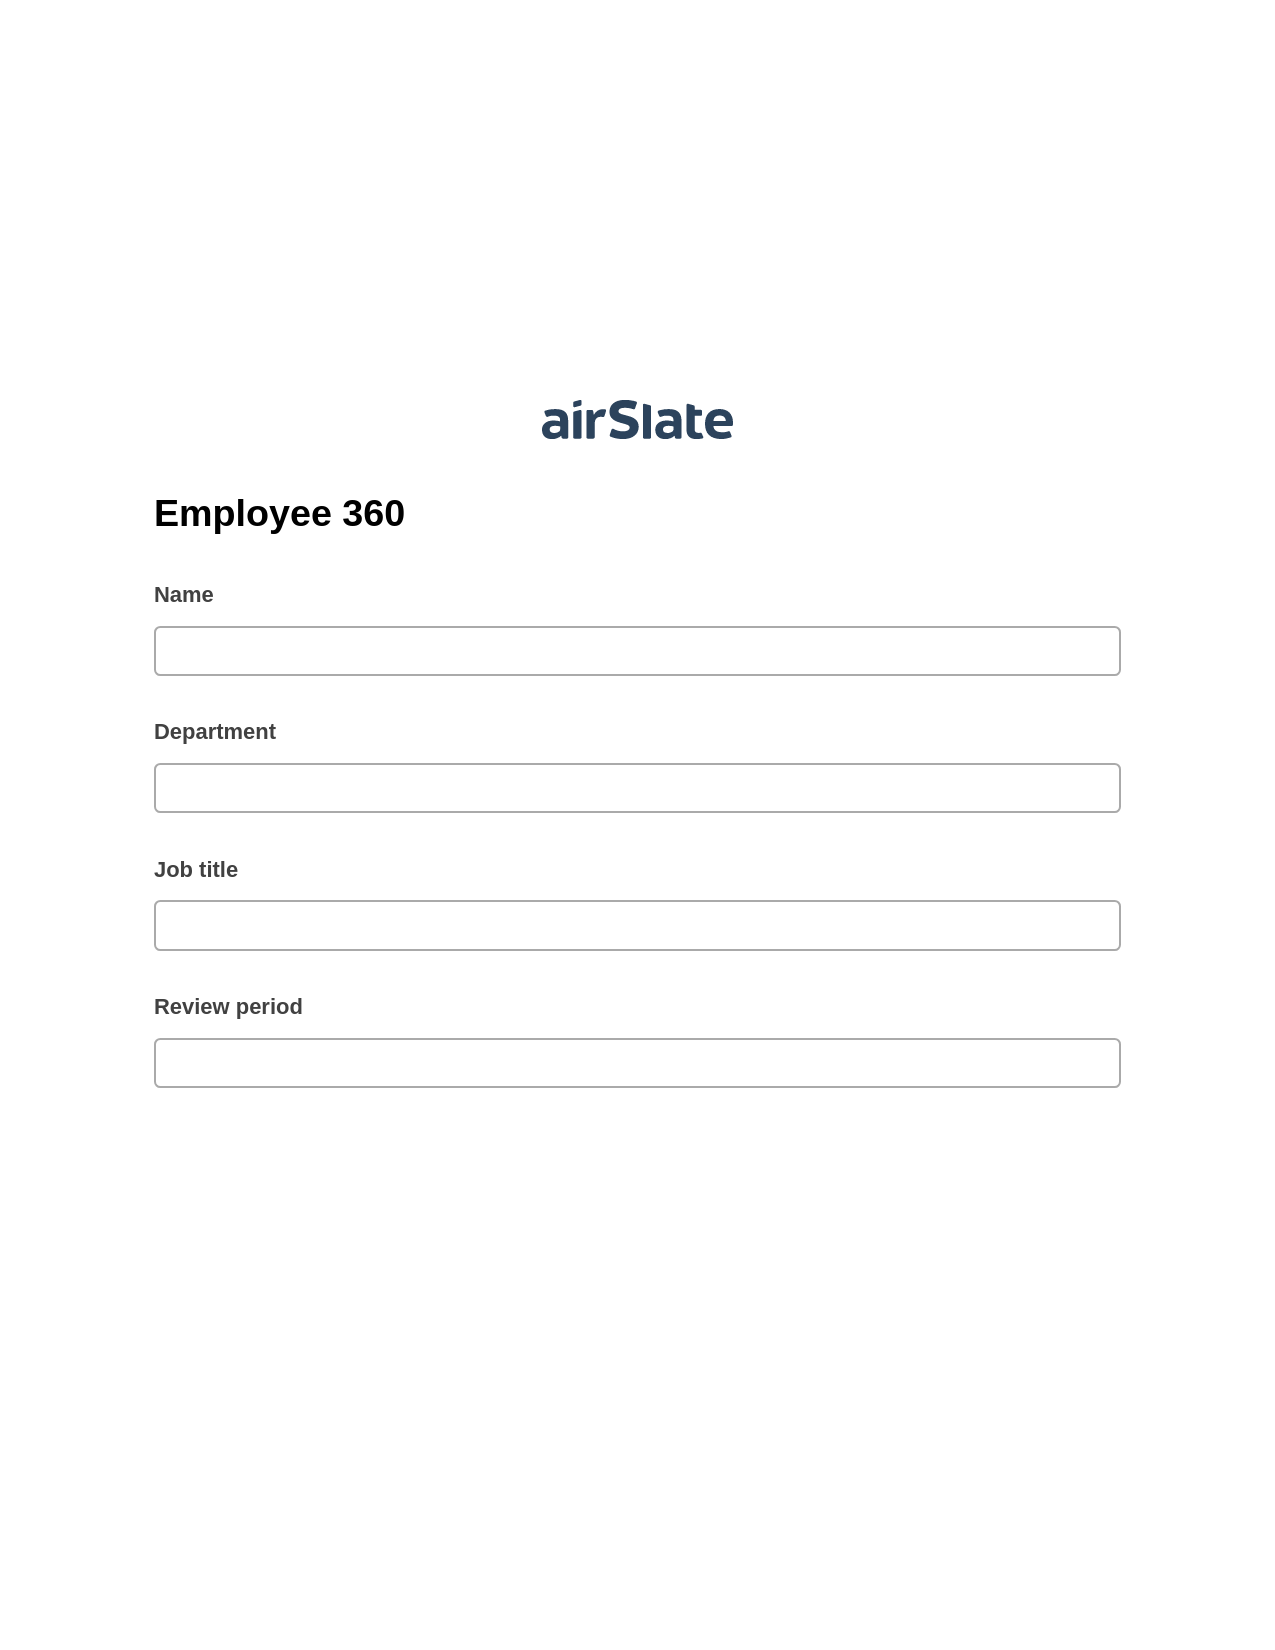 Employee 360 Prefill from NetSuite records, Update MS Dynamics 365 Record Bot, Export to WebMerge Bot